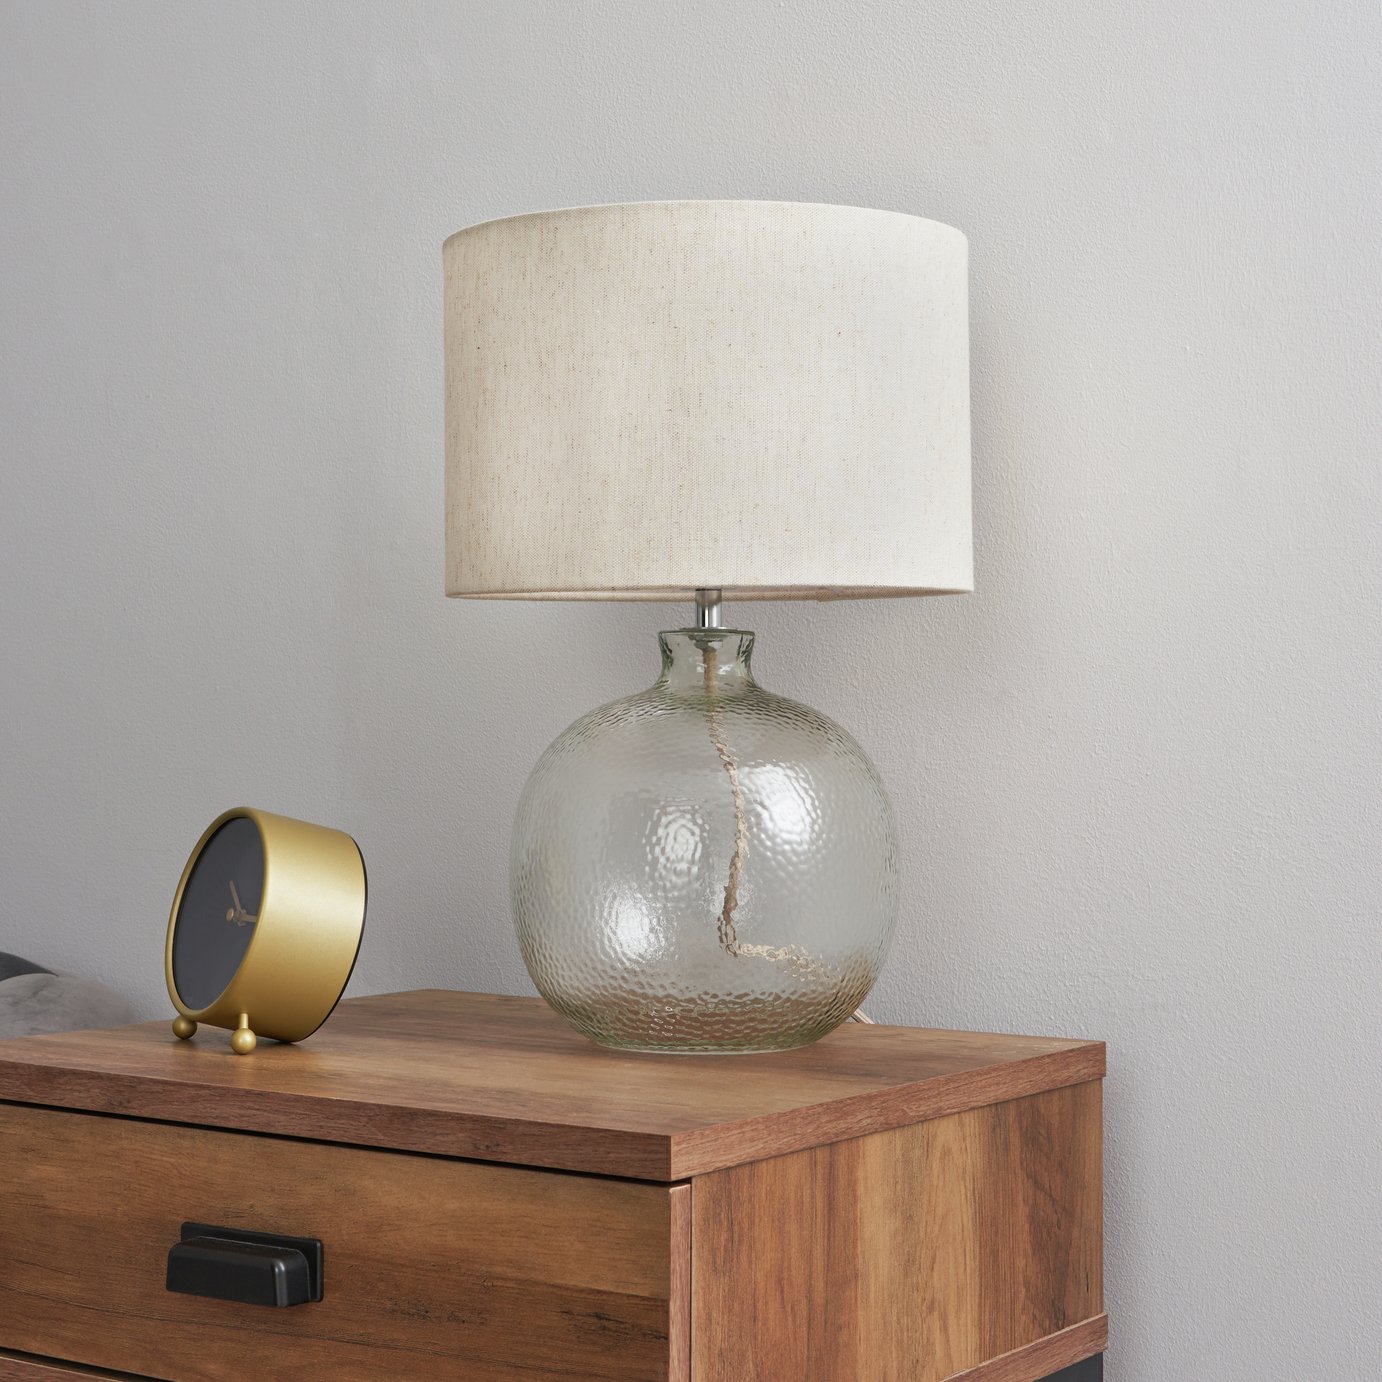 BHS Valerie Glass Table Lamp - Natural